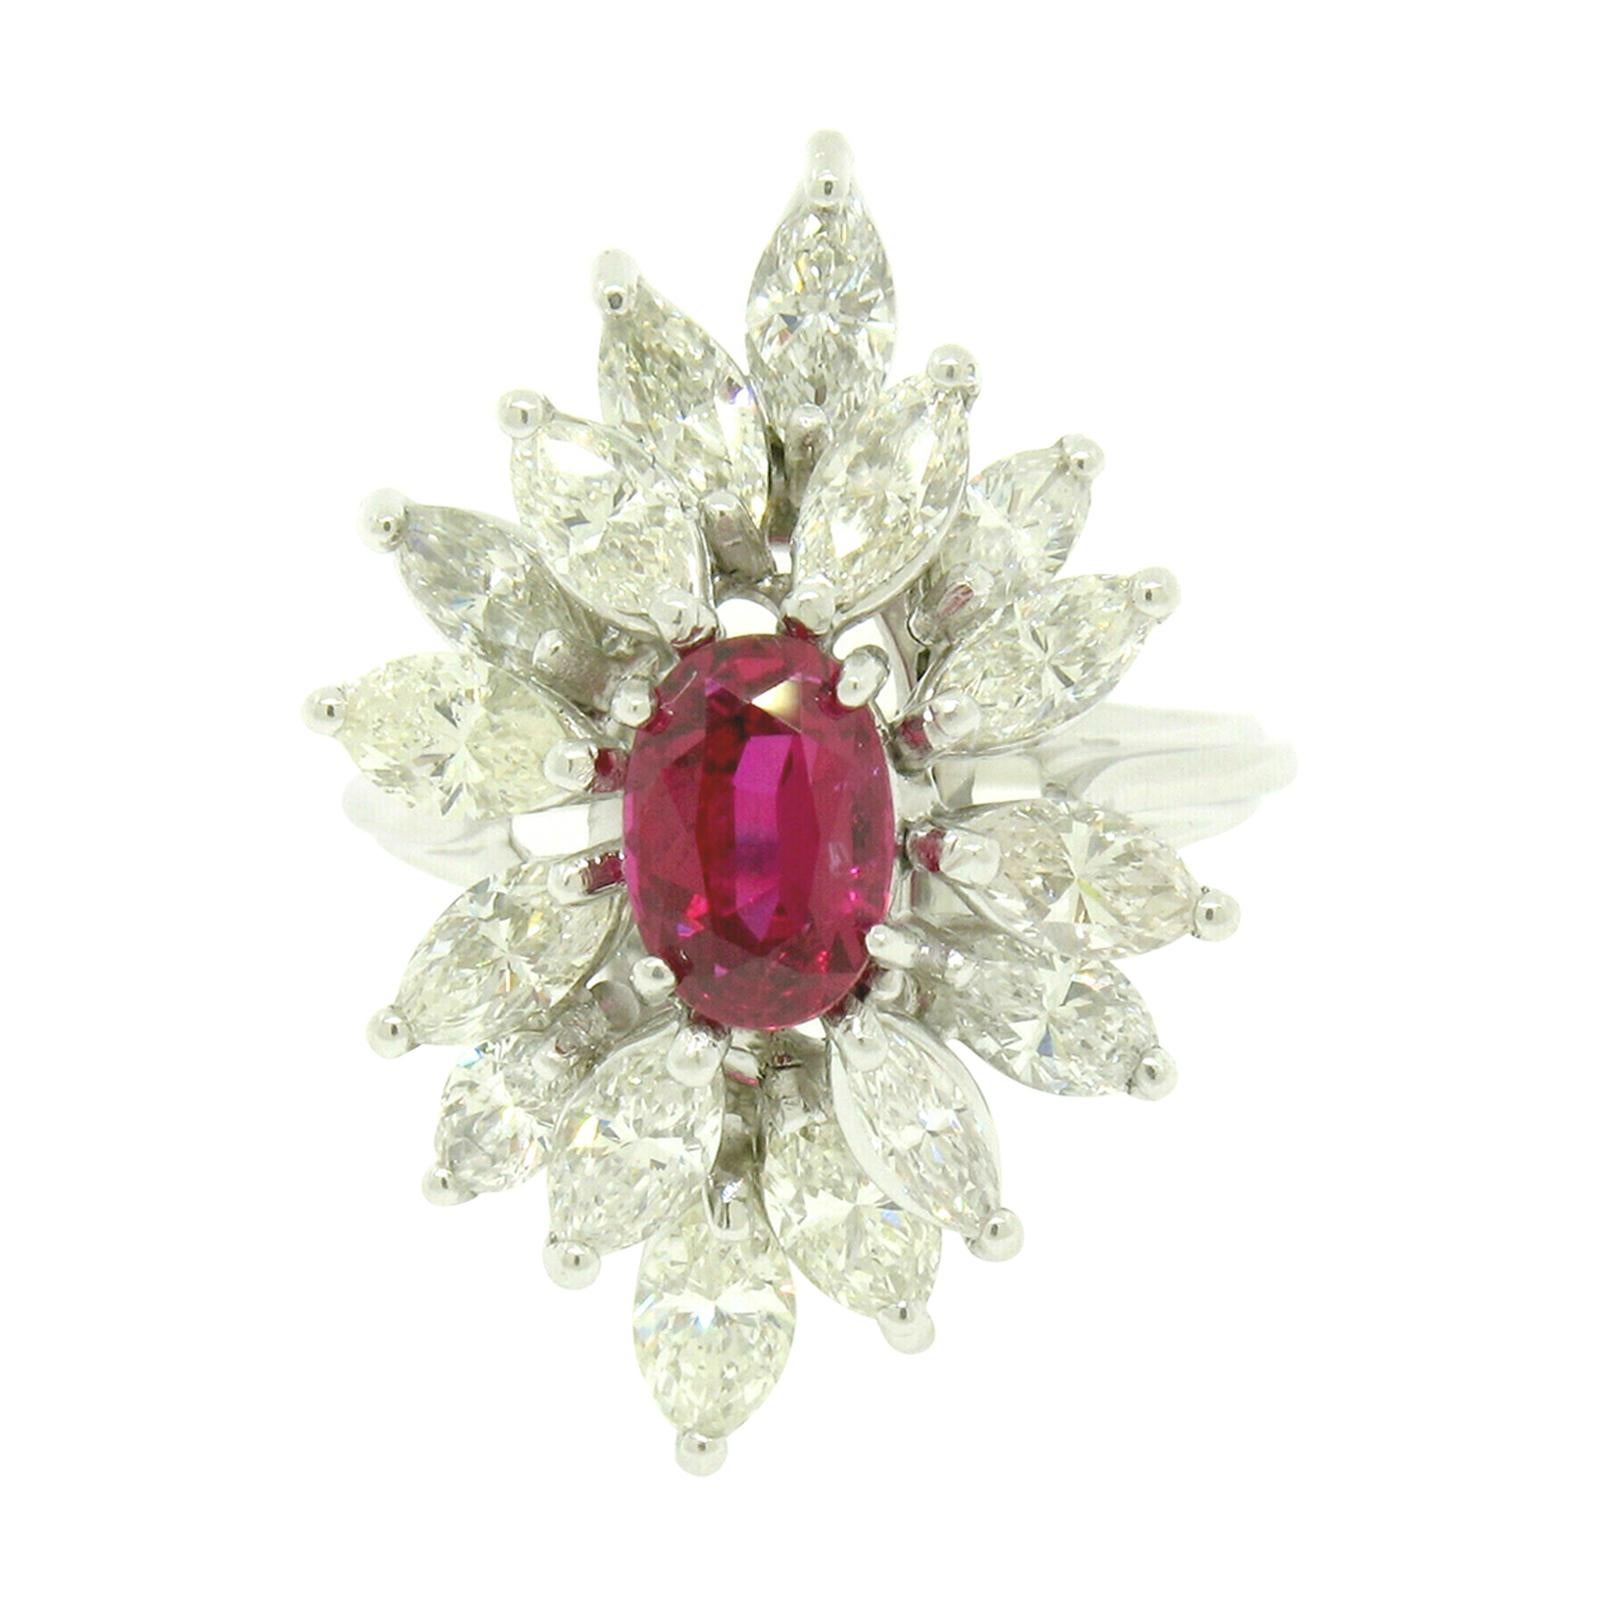 Vintage 18k White Gold 1.39ct GIA Ruby & Marquise Diamond Cocktail Cluster Ring